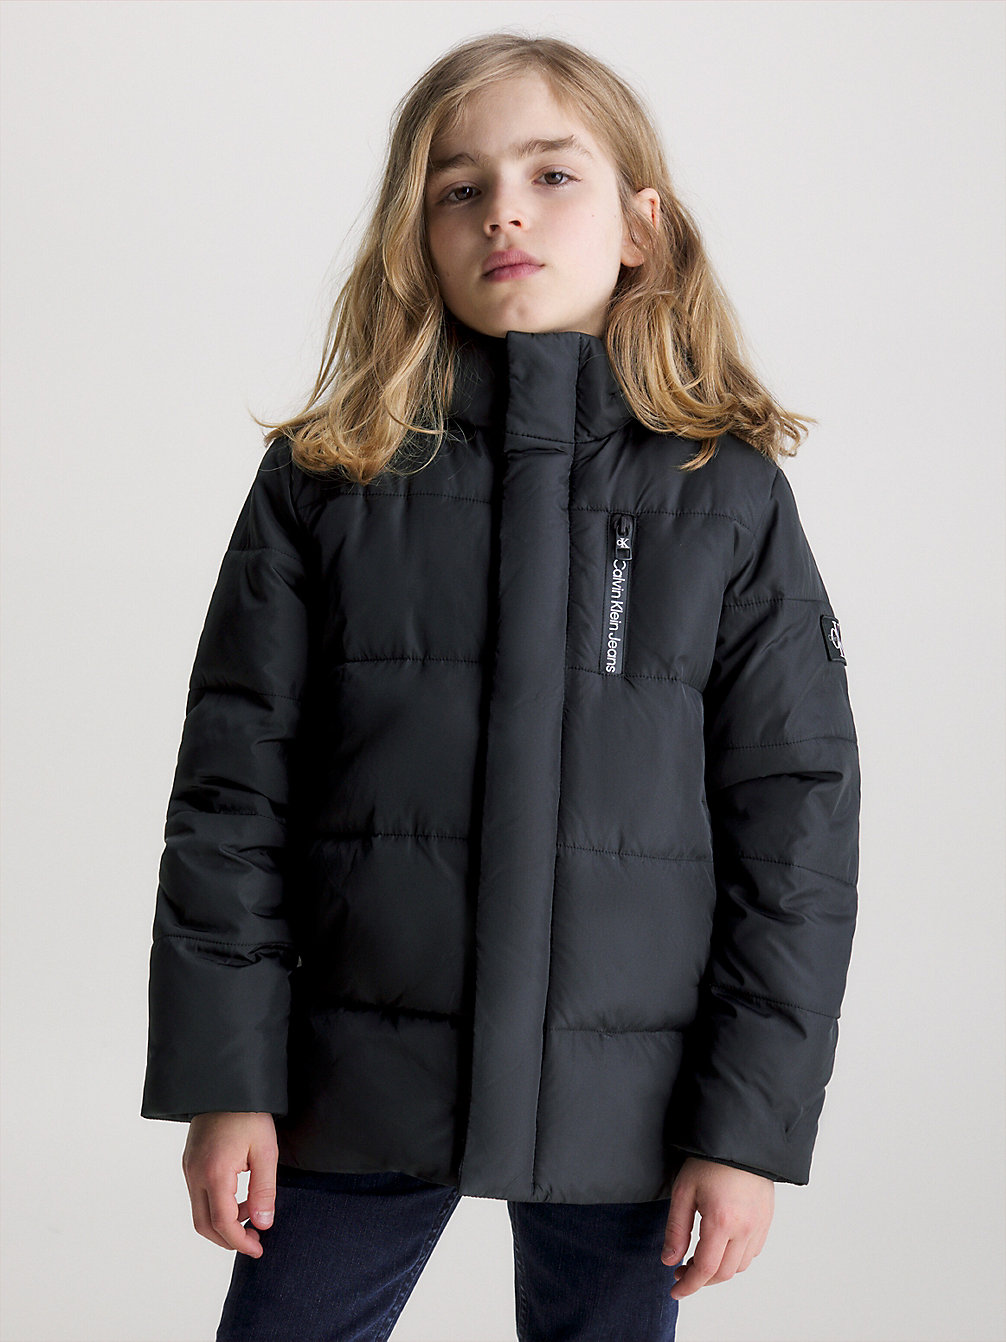 CK BLACK Recycled Polyester Puffer Jacket undefined boys Calvin Klein